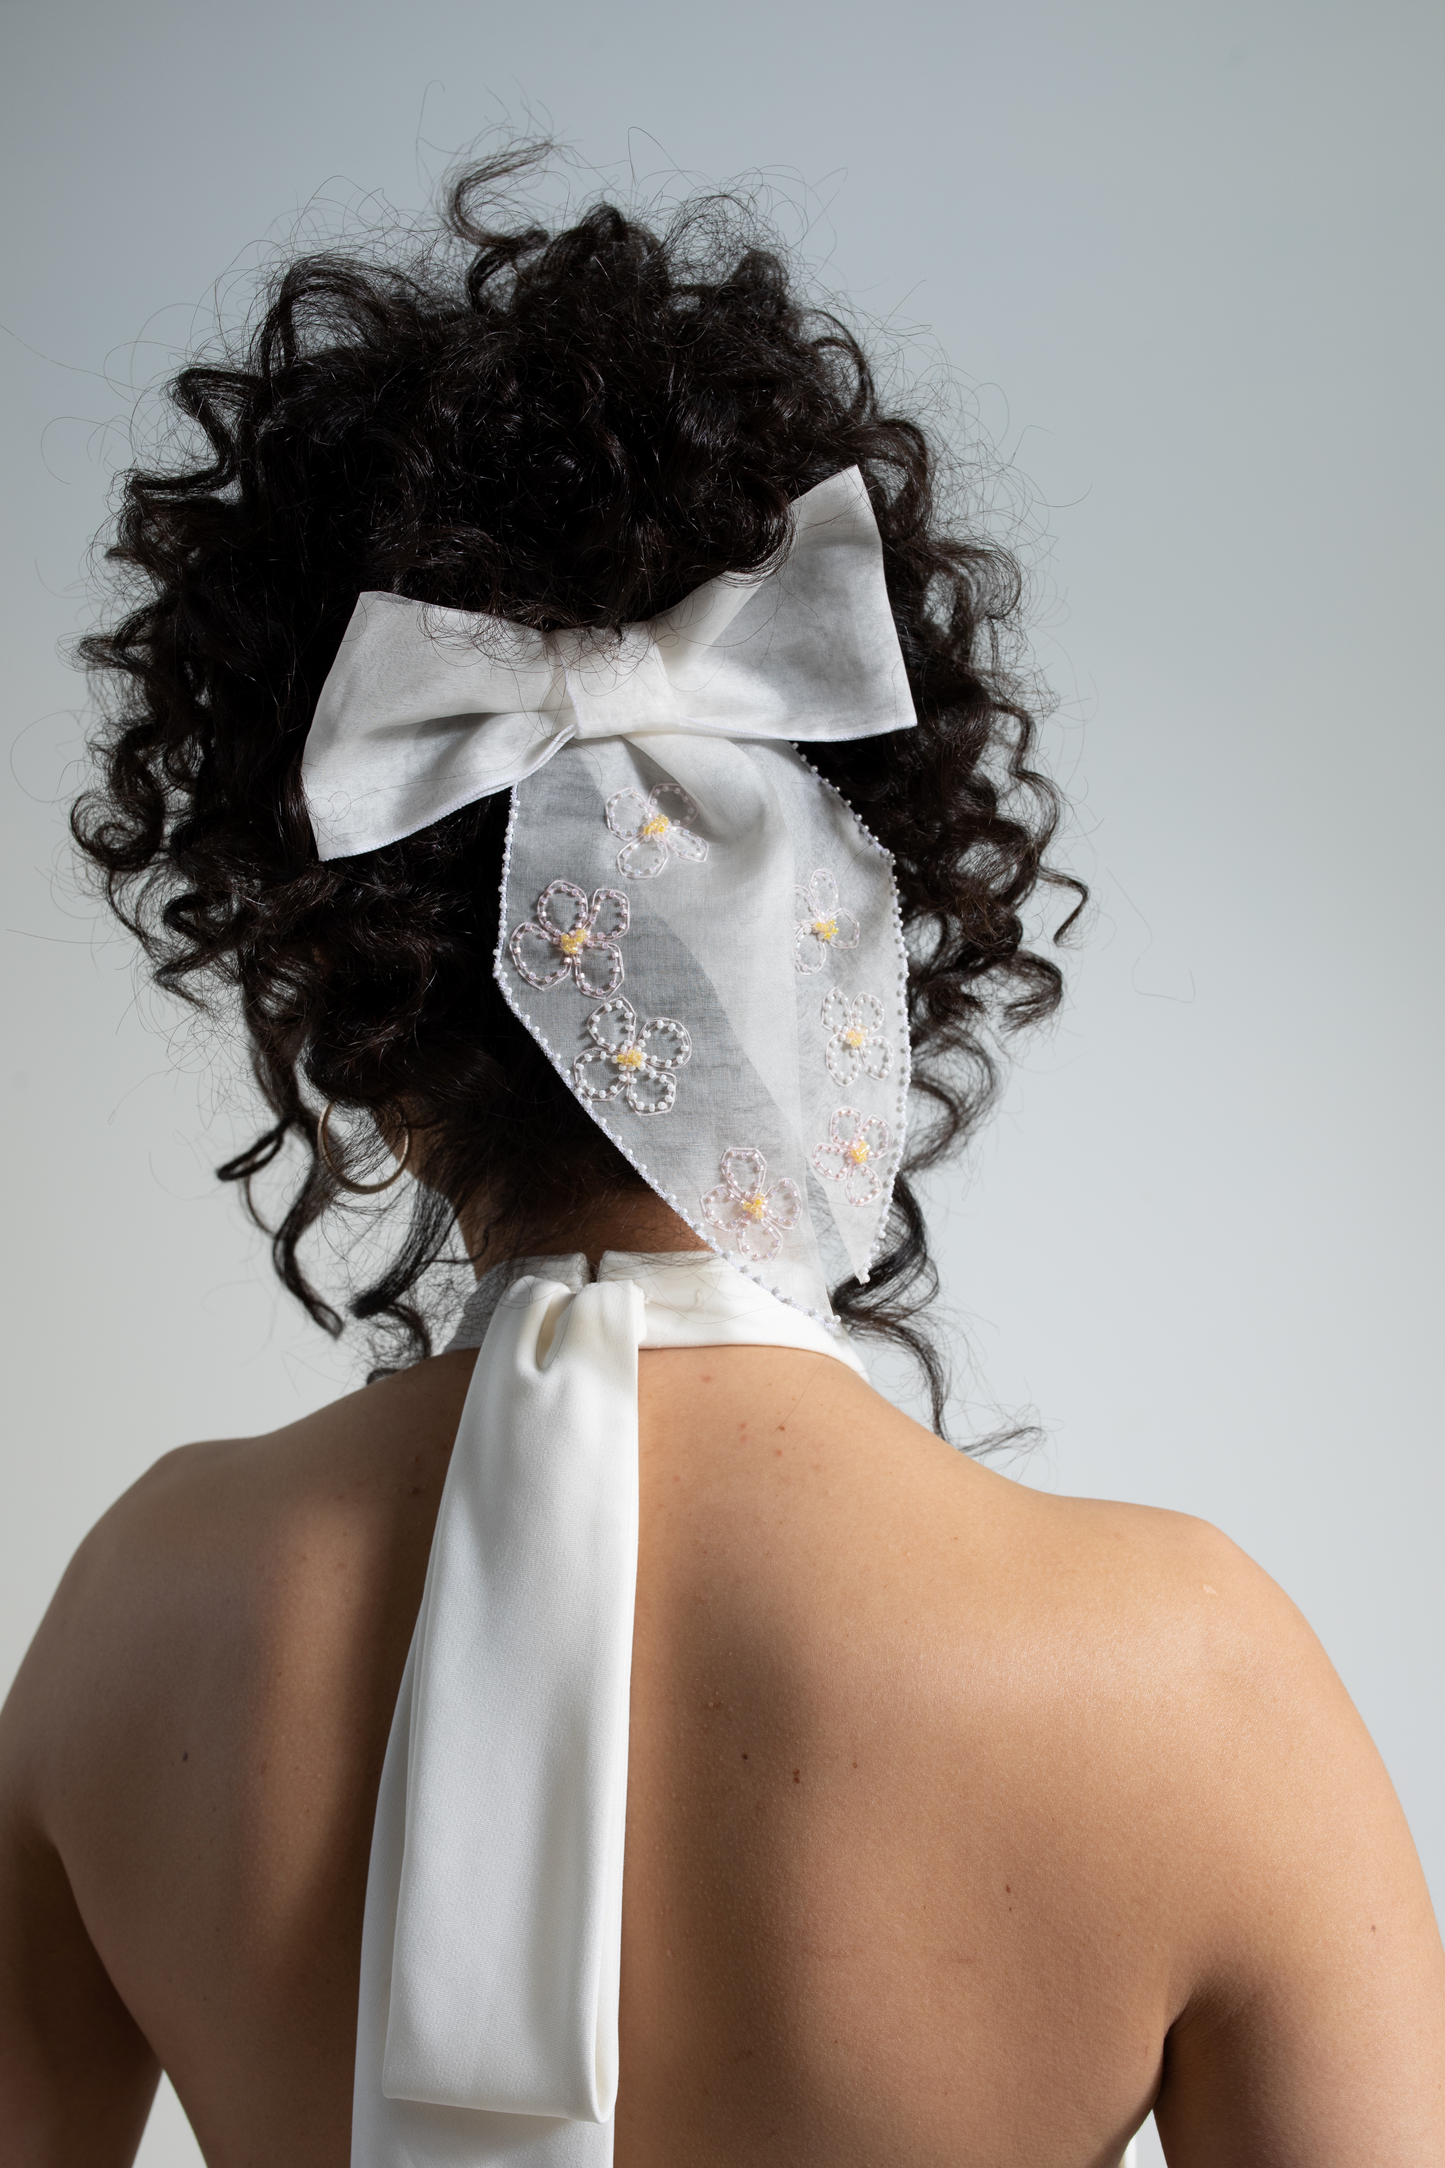 Silk organza bridal bow, delicately hand-embroidered with beaded blossom flowers. This decorative hair bow is part of a collection of embellished luxury bridal accessories and bridal headwear.